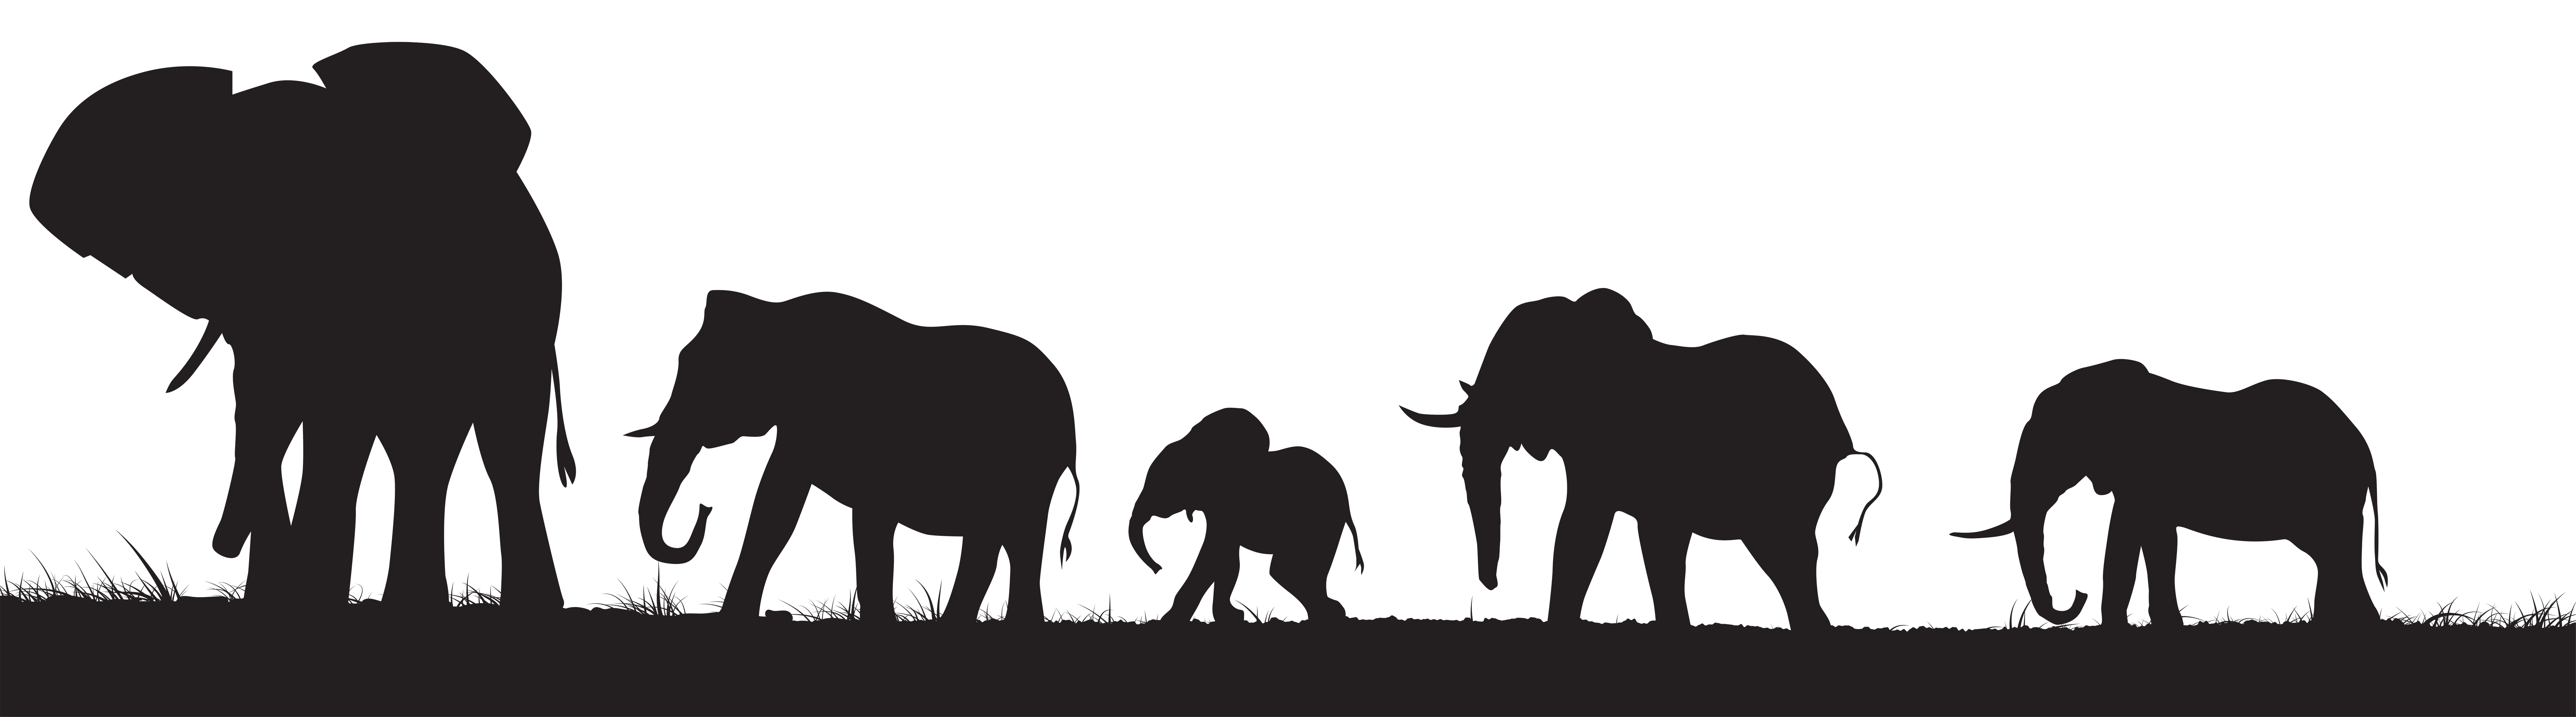 Free Elephant Cliparts Silhouette, Download Free Elephant Cliparts